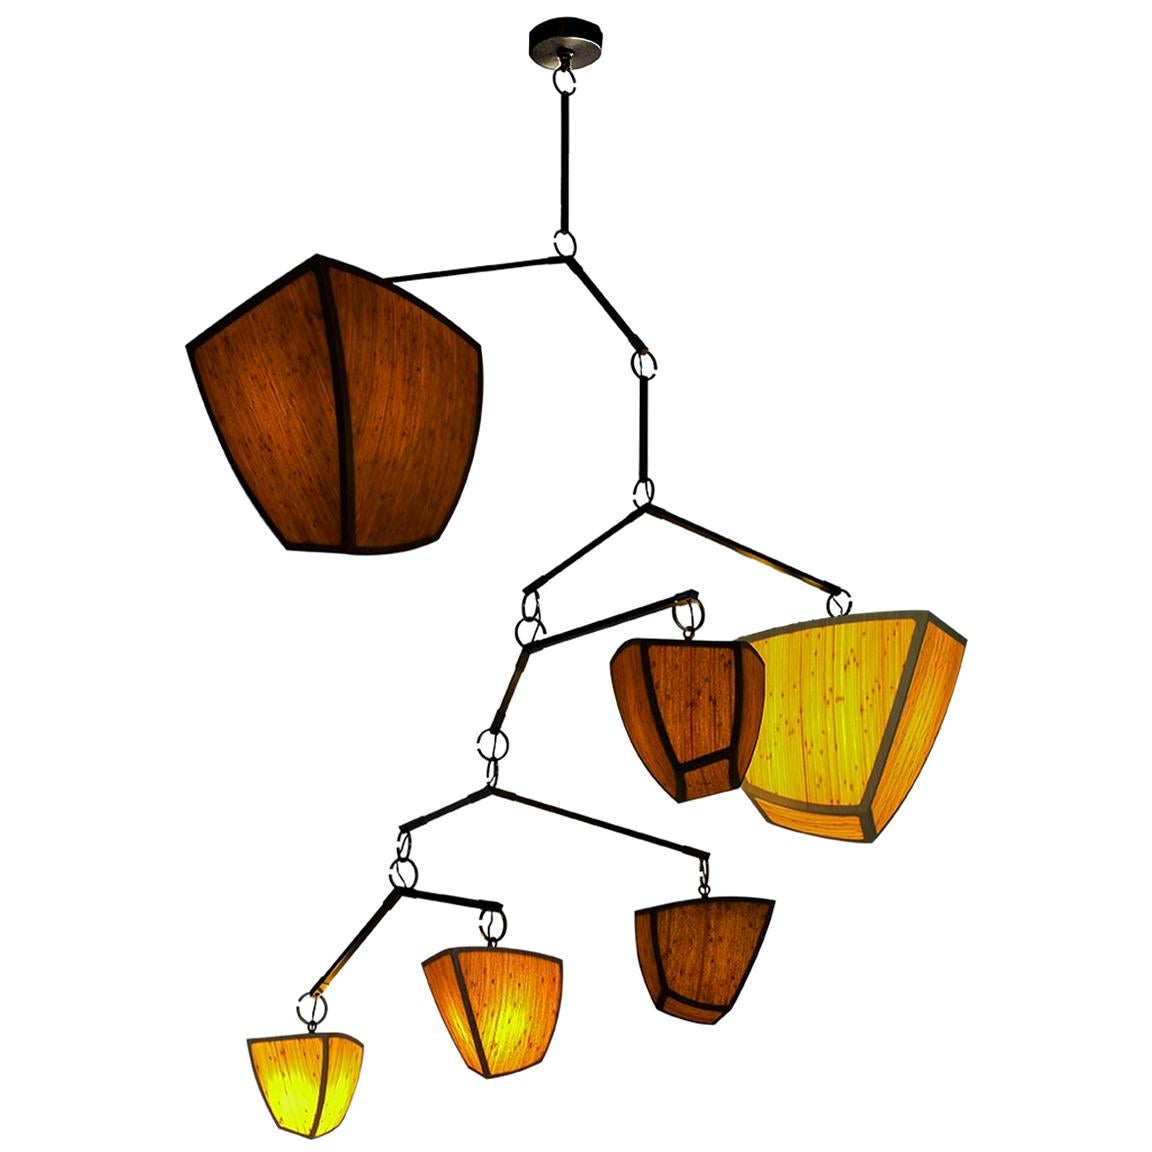 Bamboo Ivy 6: ABCDFG Mobile Chandelier, handmade by Andrea Claire Studio